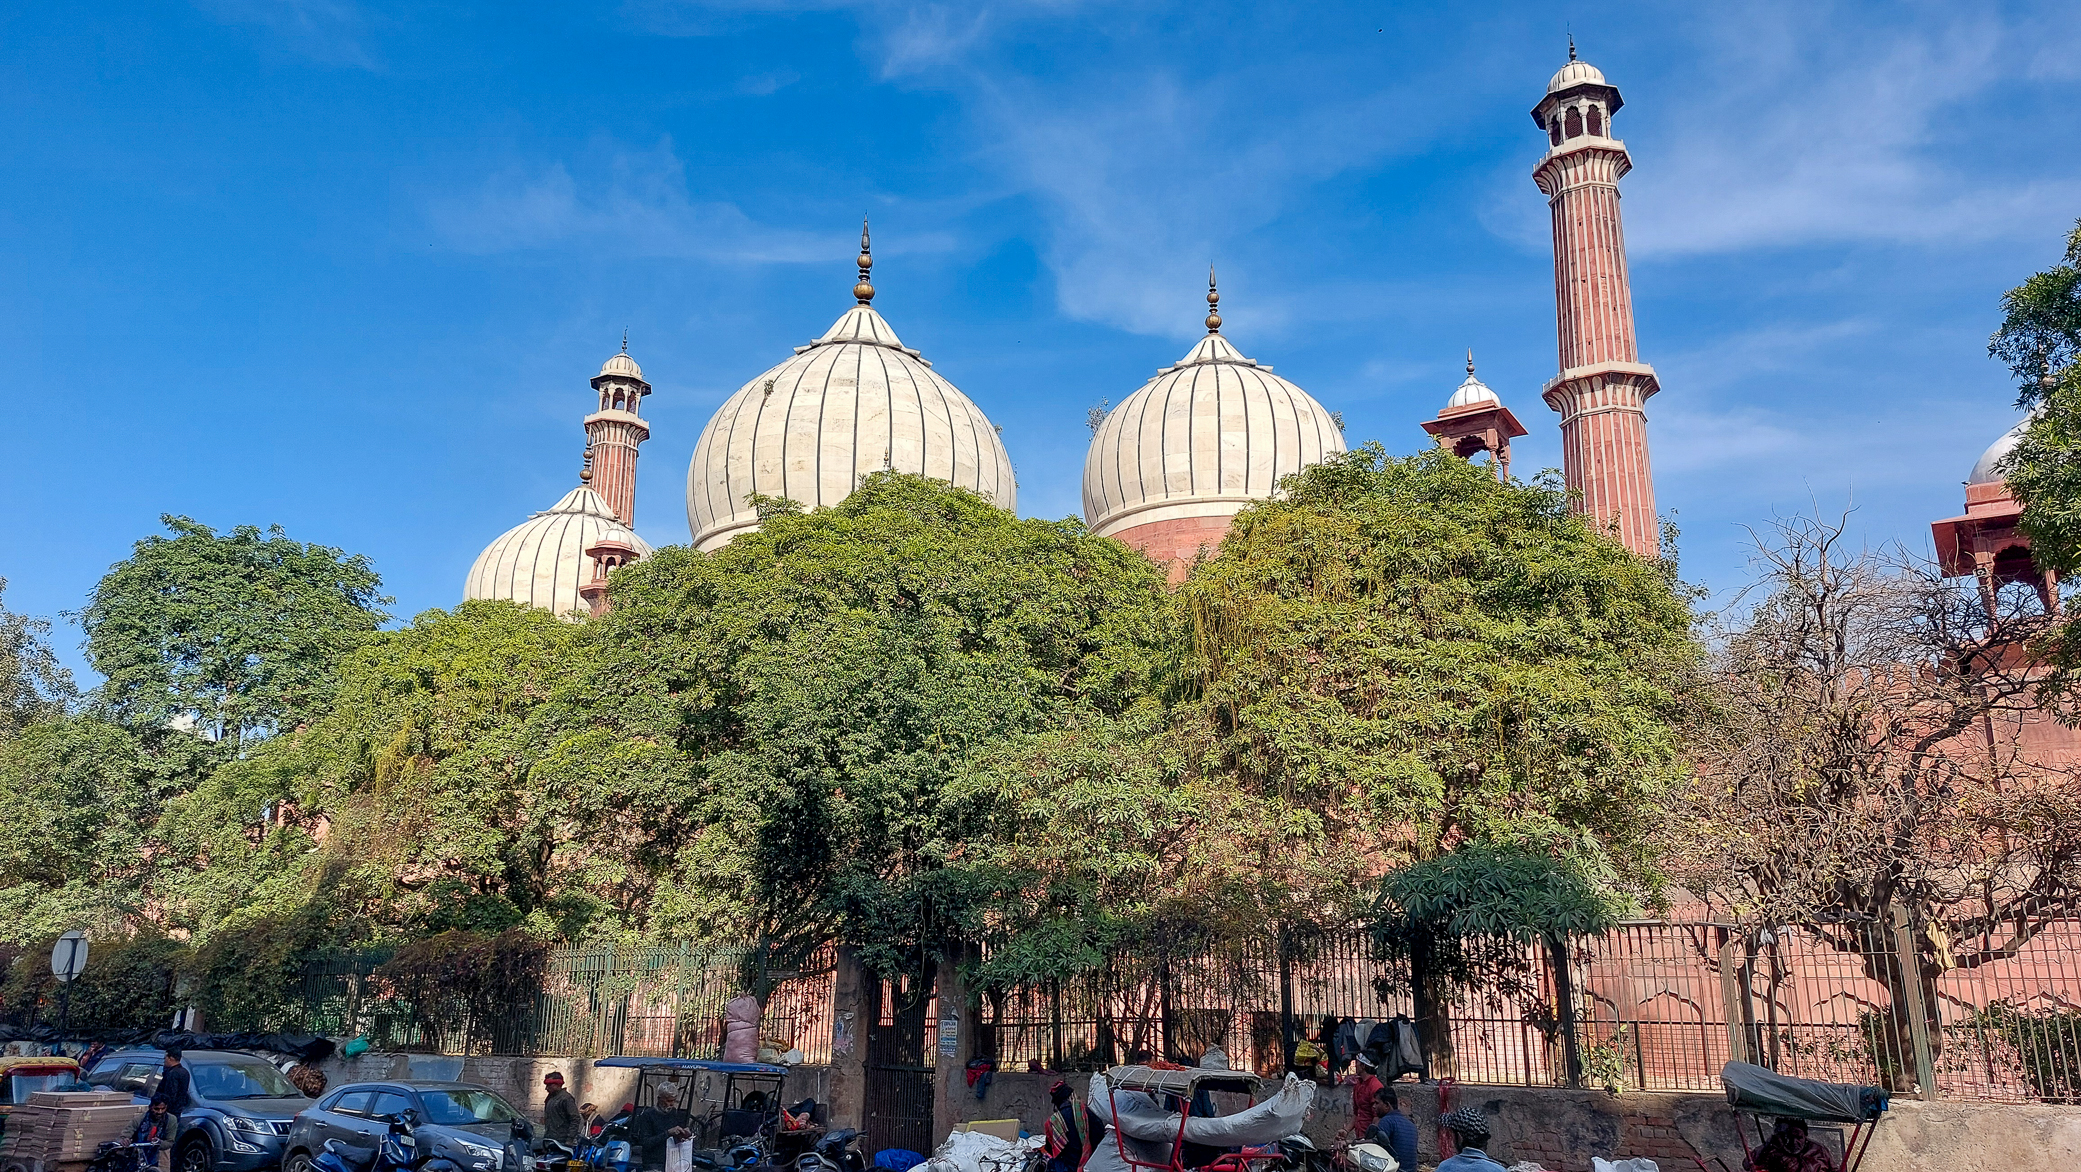 <span  class="uc_style_uc_tiles_grid_image_elementor_uc_items_attribute_title" style="color:#ffffff;">Jama Masjid (back view)</span>